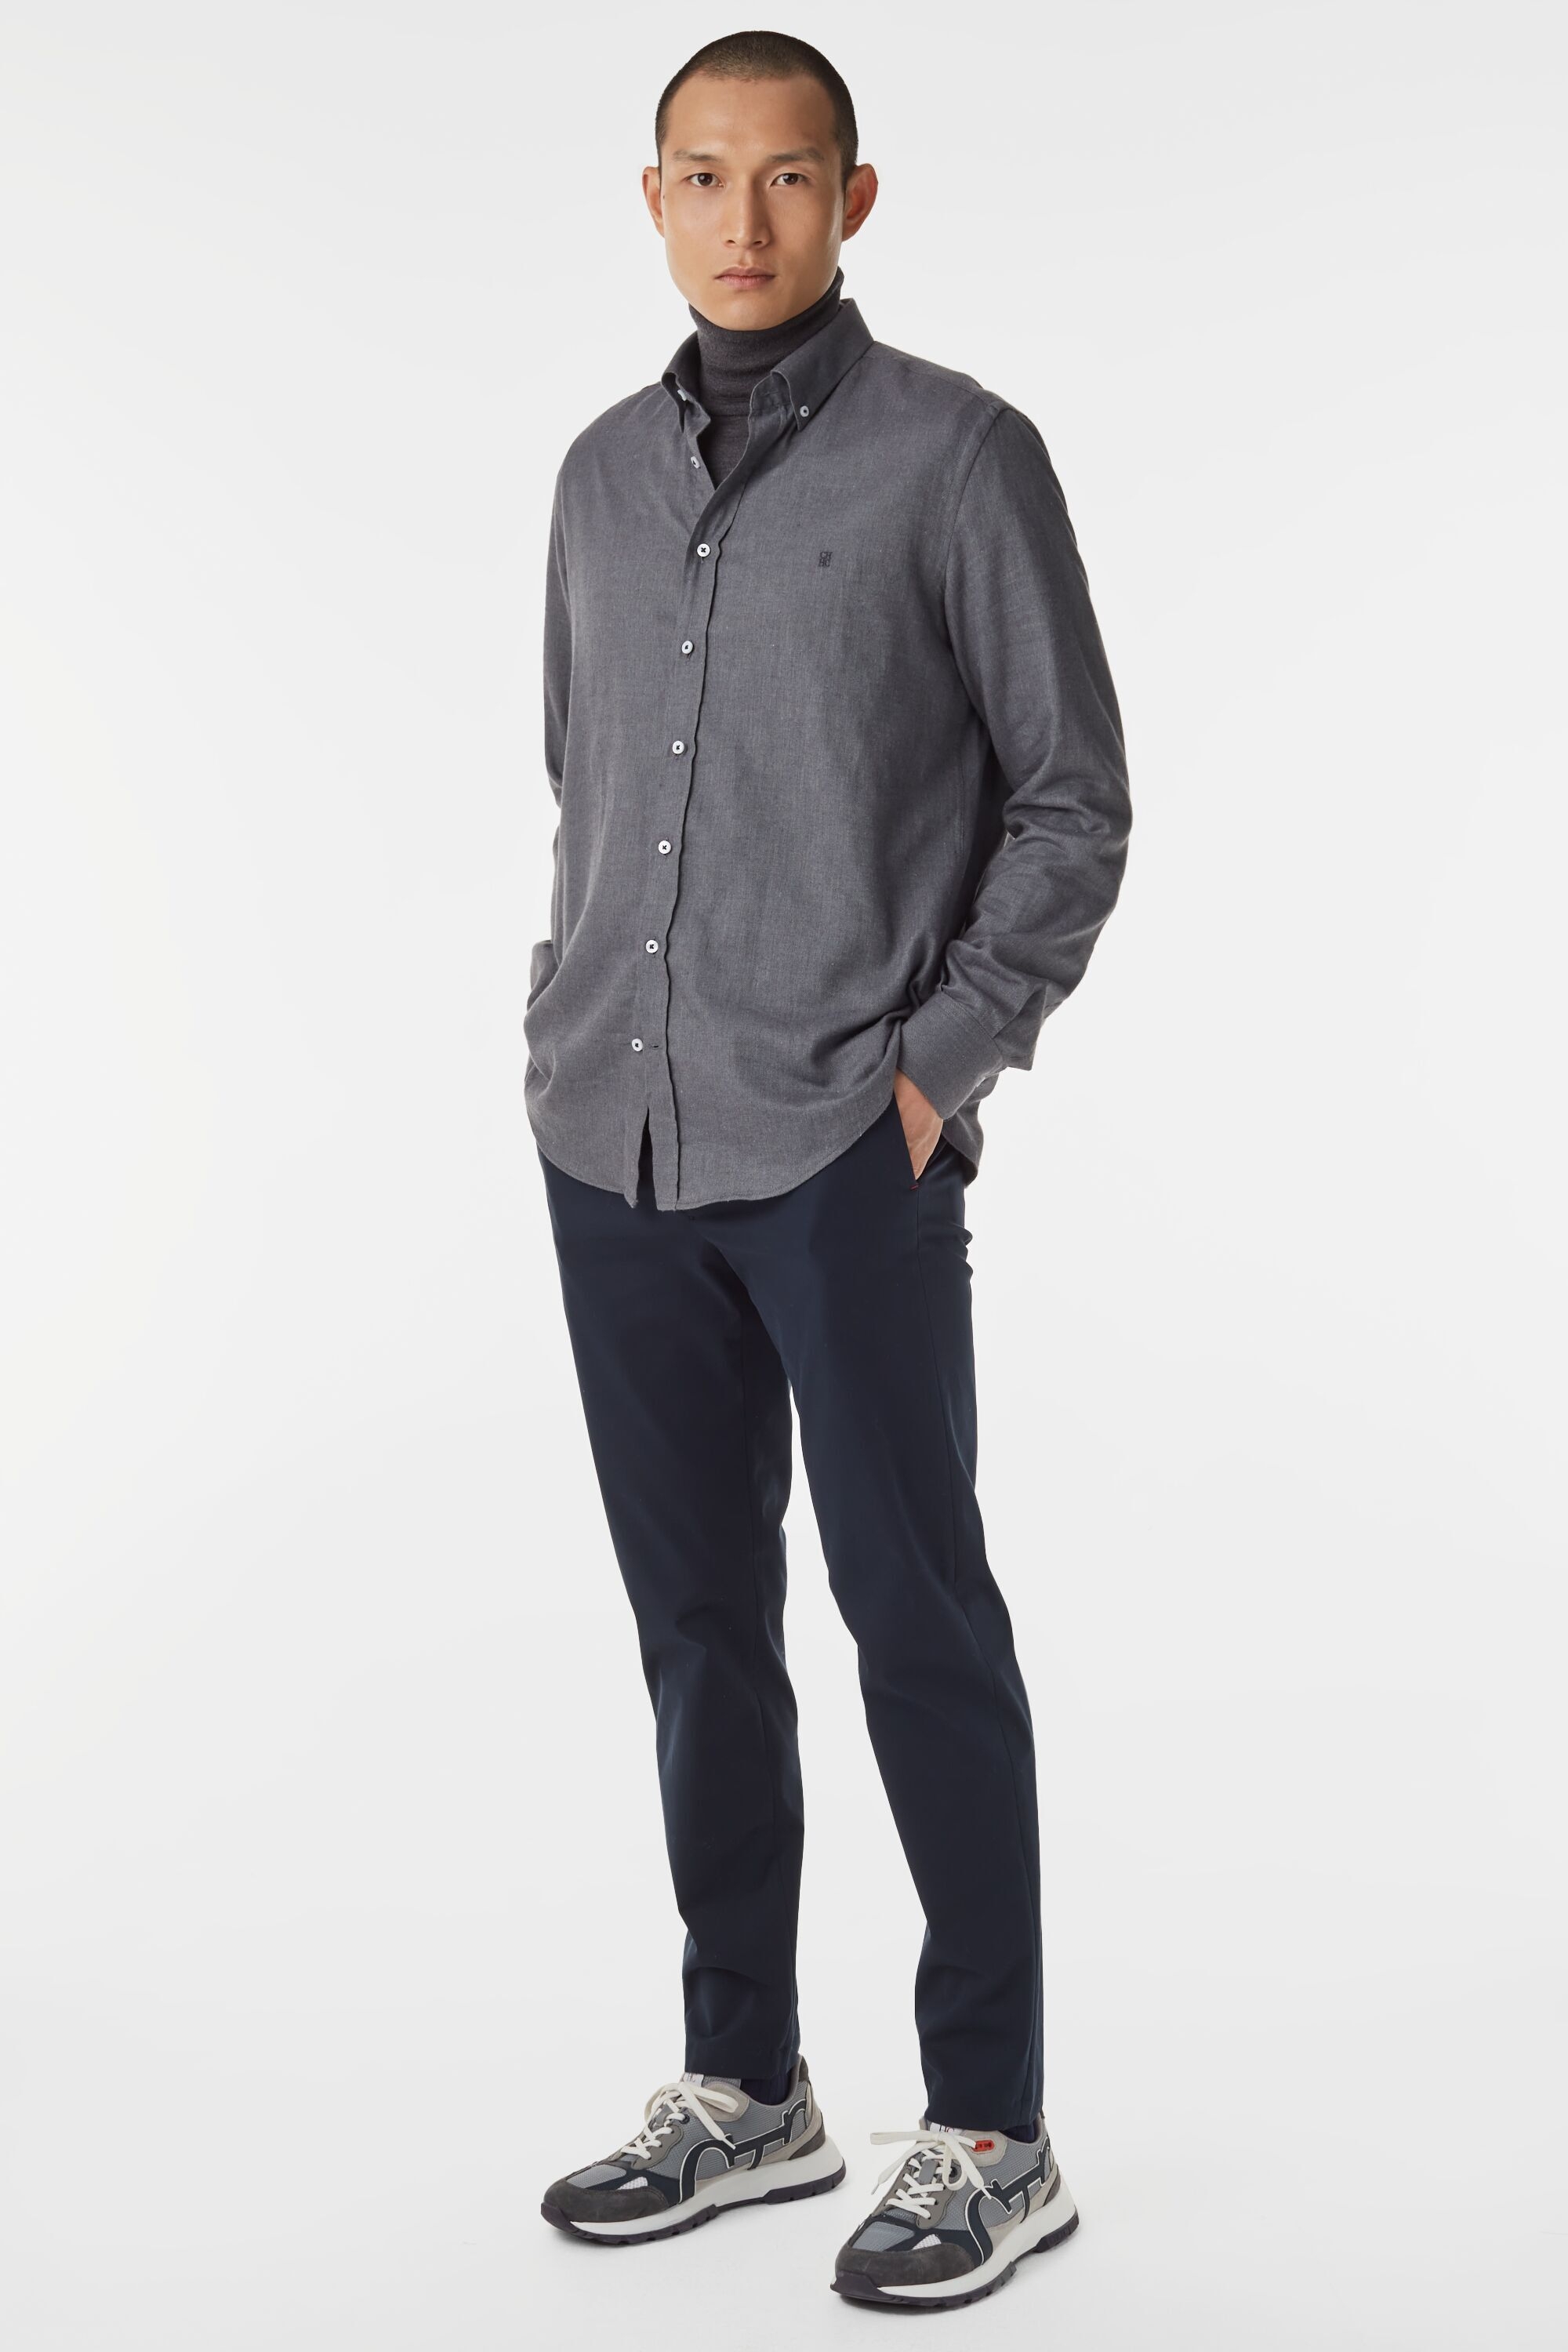 Micro twill relaxed fit chinos